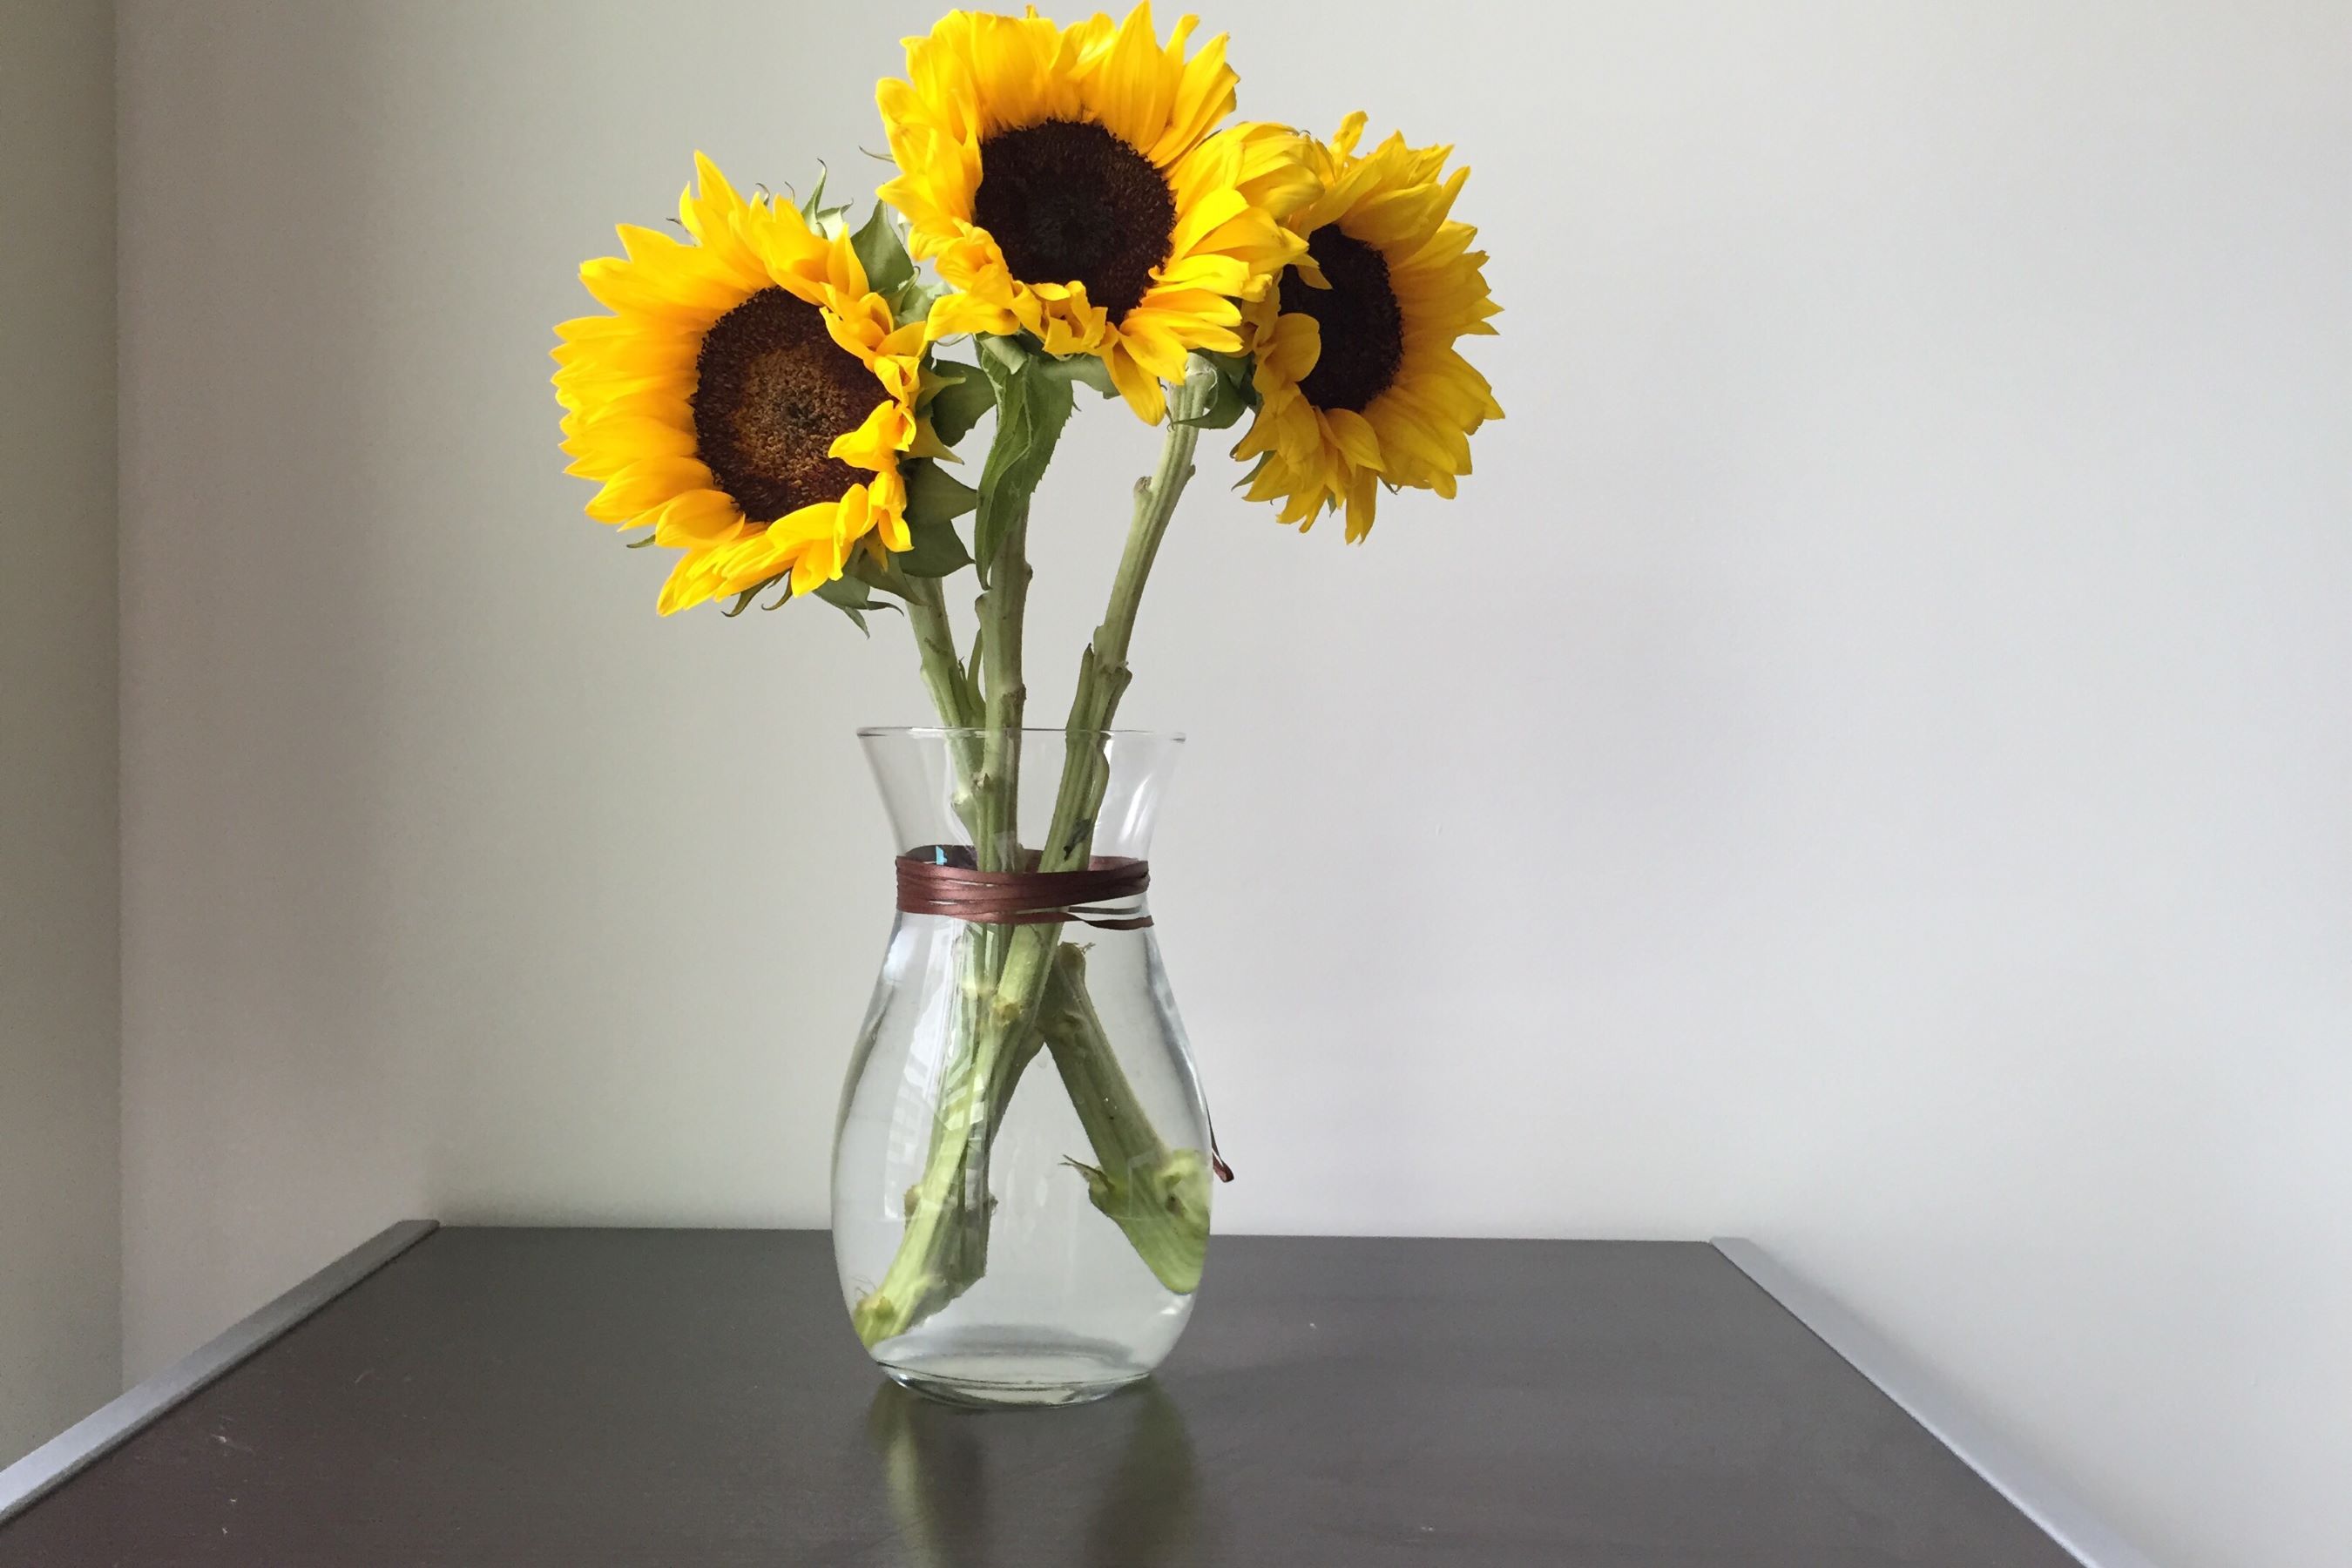 How To Store Sunflowers